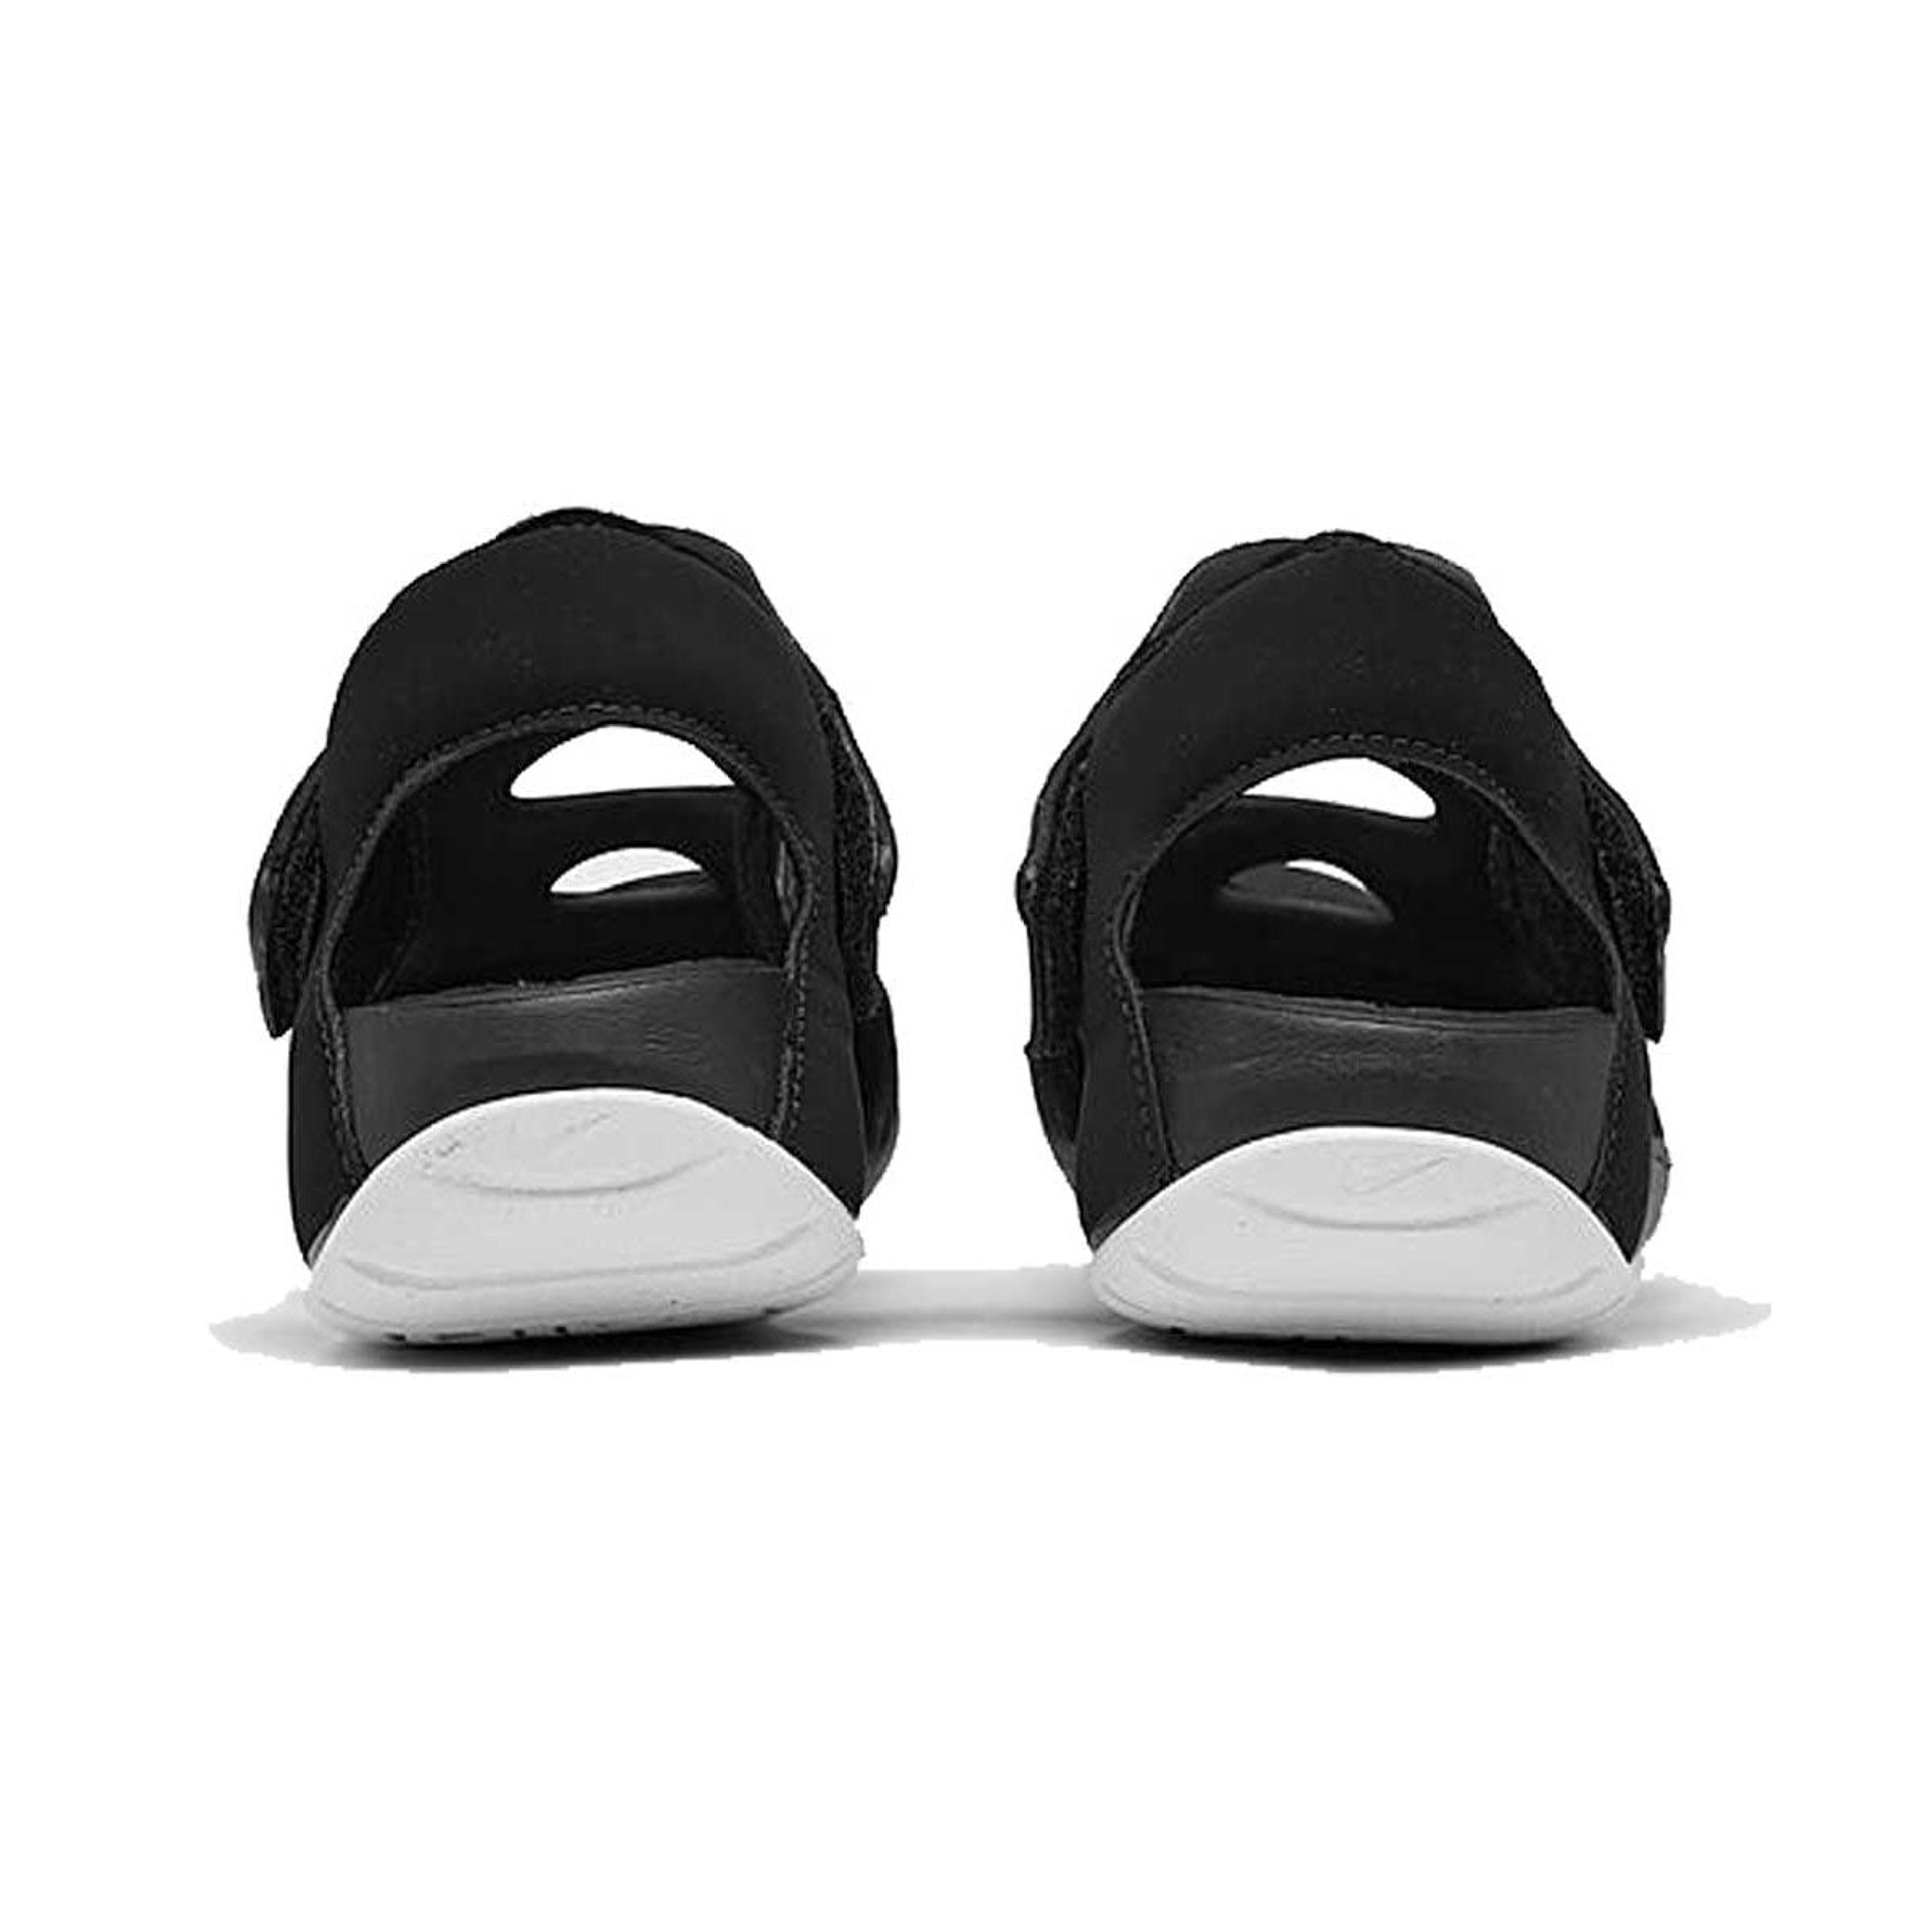 Alternate View 2 of Nike Kids Sunray Protect 3 Sandals